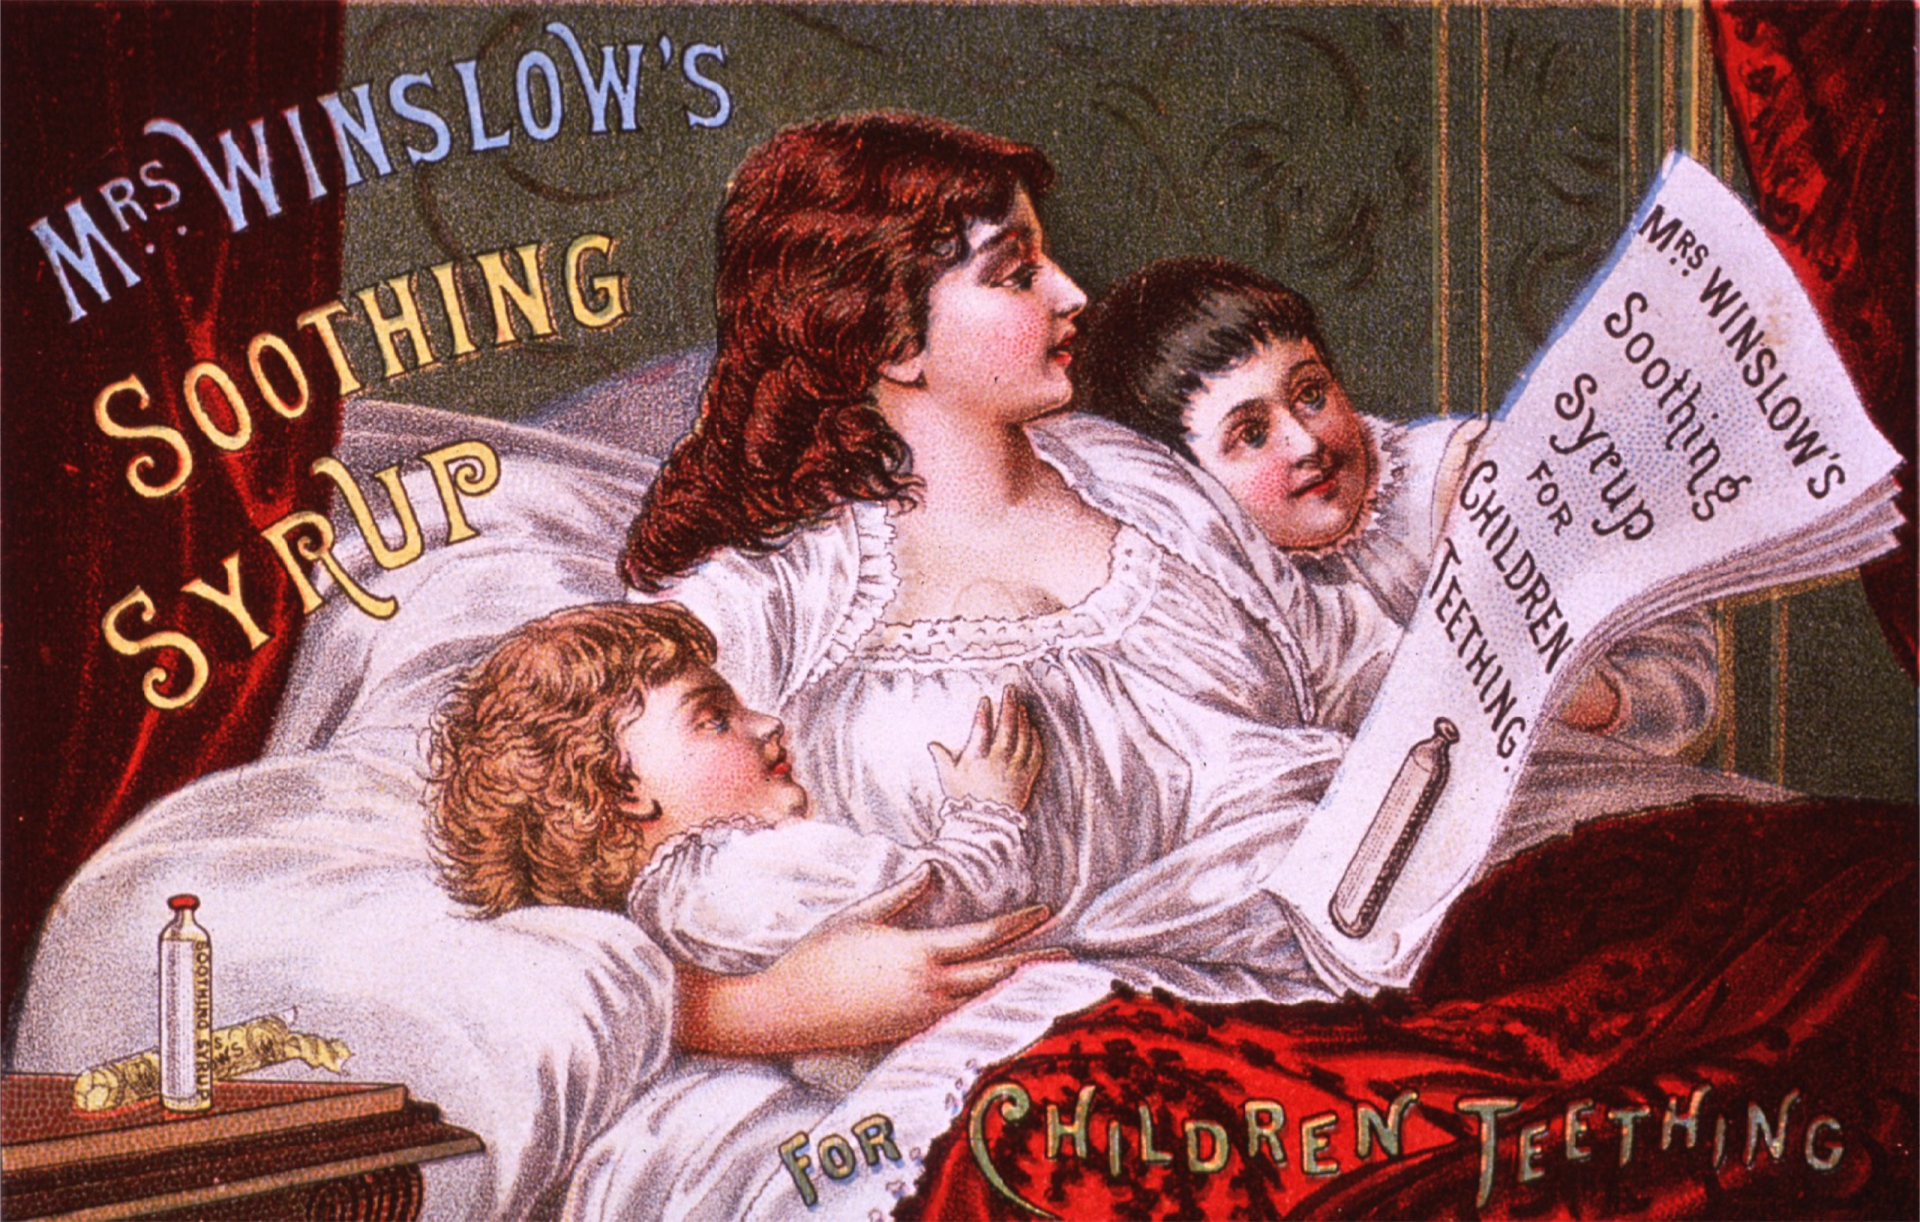 Card features a mother in bed with her children. She is reading a newspaper advertisement for Mrs. Winslow's Soothing Syrup.